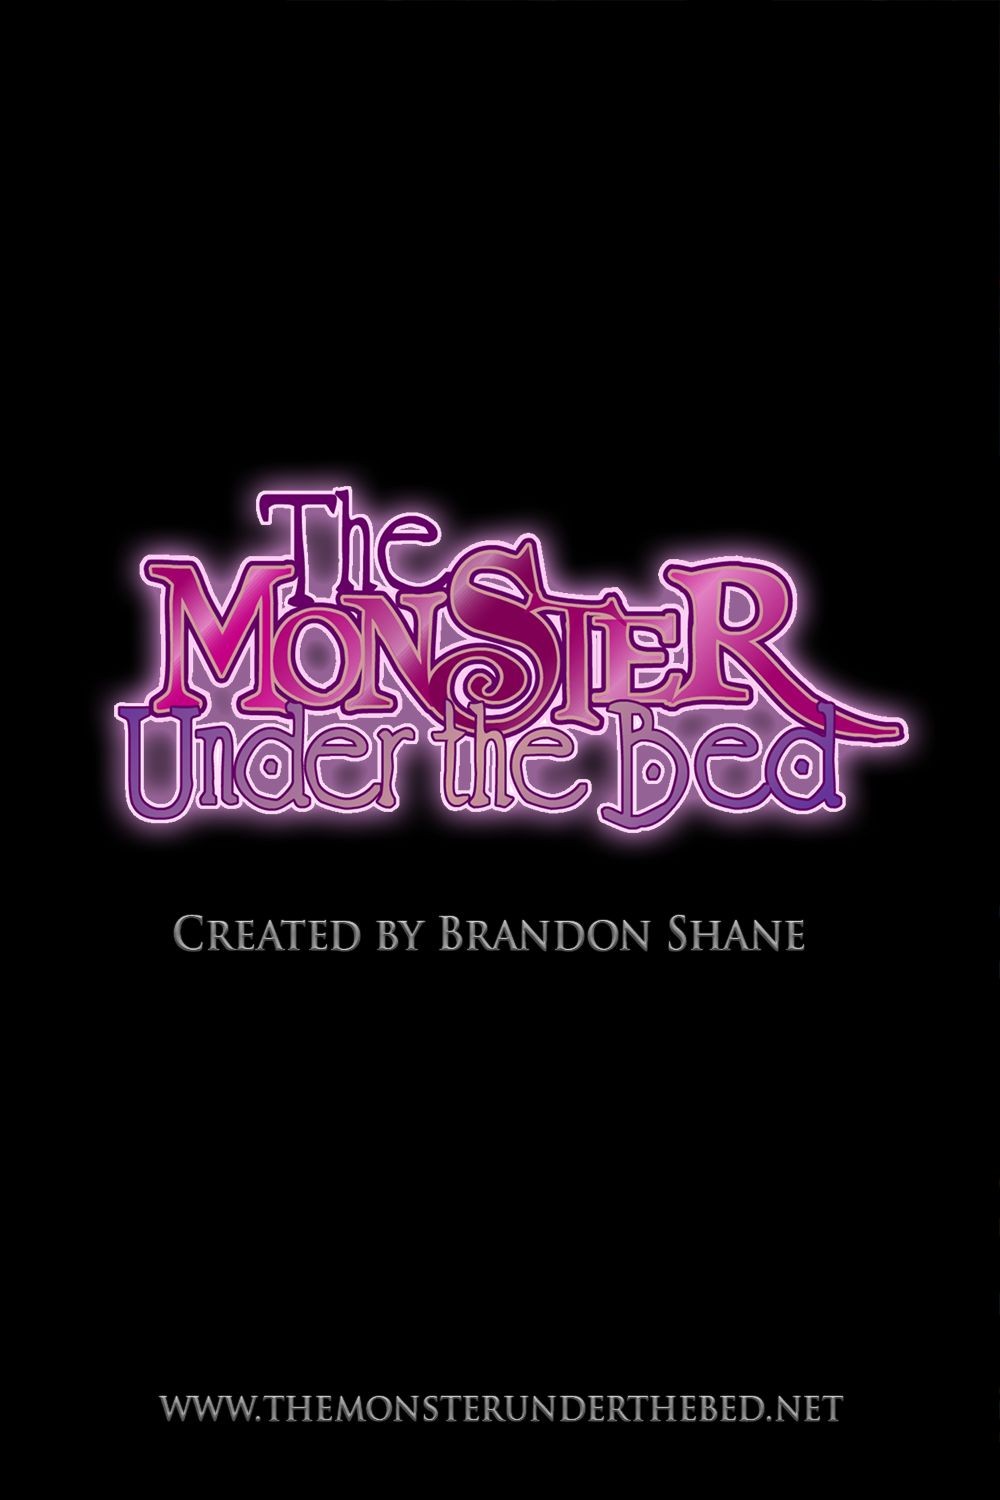 Orgy [Brandon Shane] The Monster Under The Bed [Ongoing] Foot Fetish